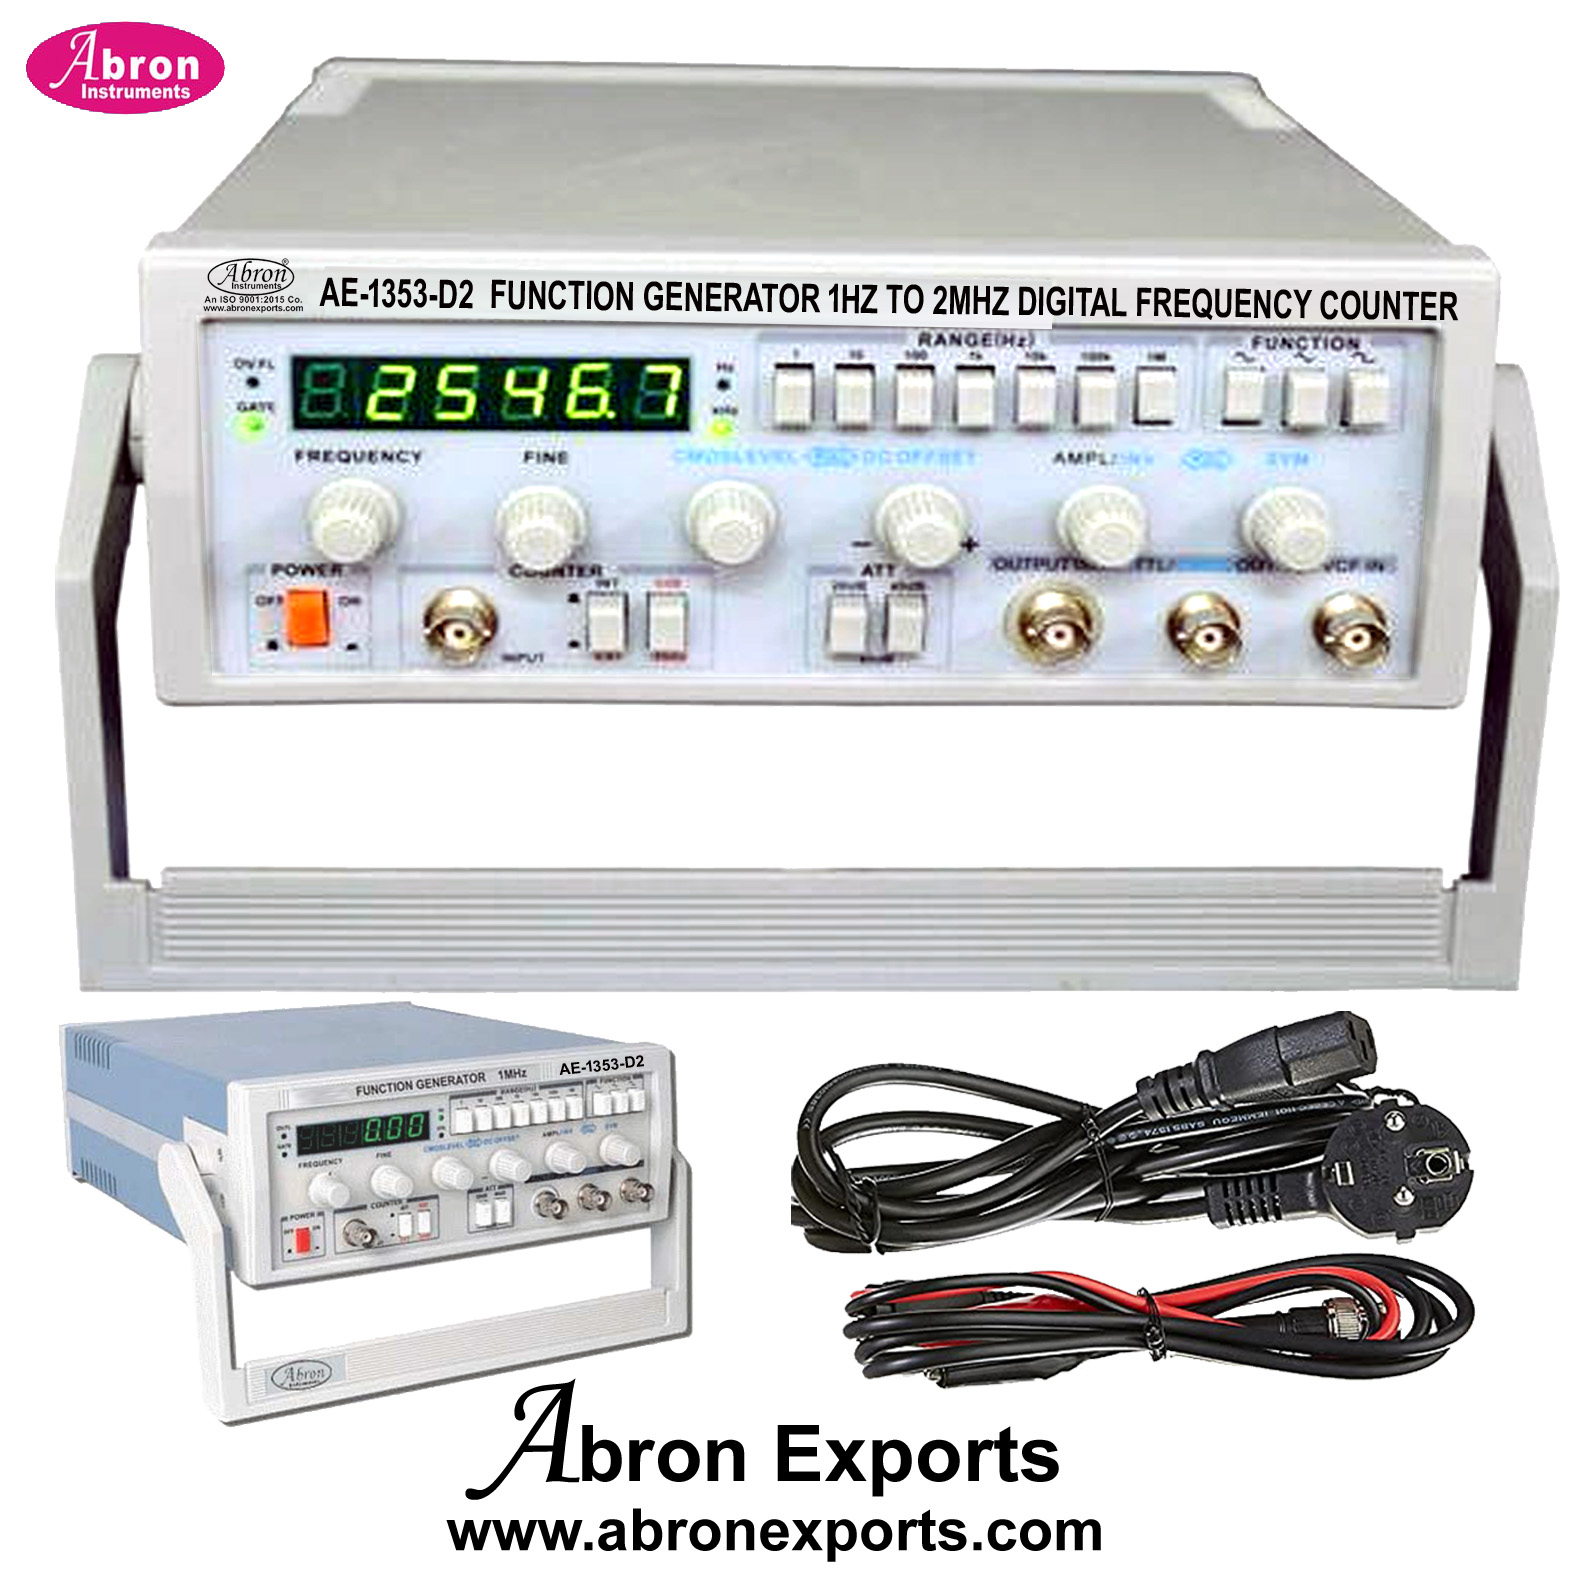 Frequency Counter digital 10hz to 30mhz abron AE-1353F